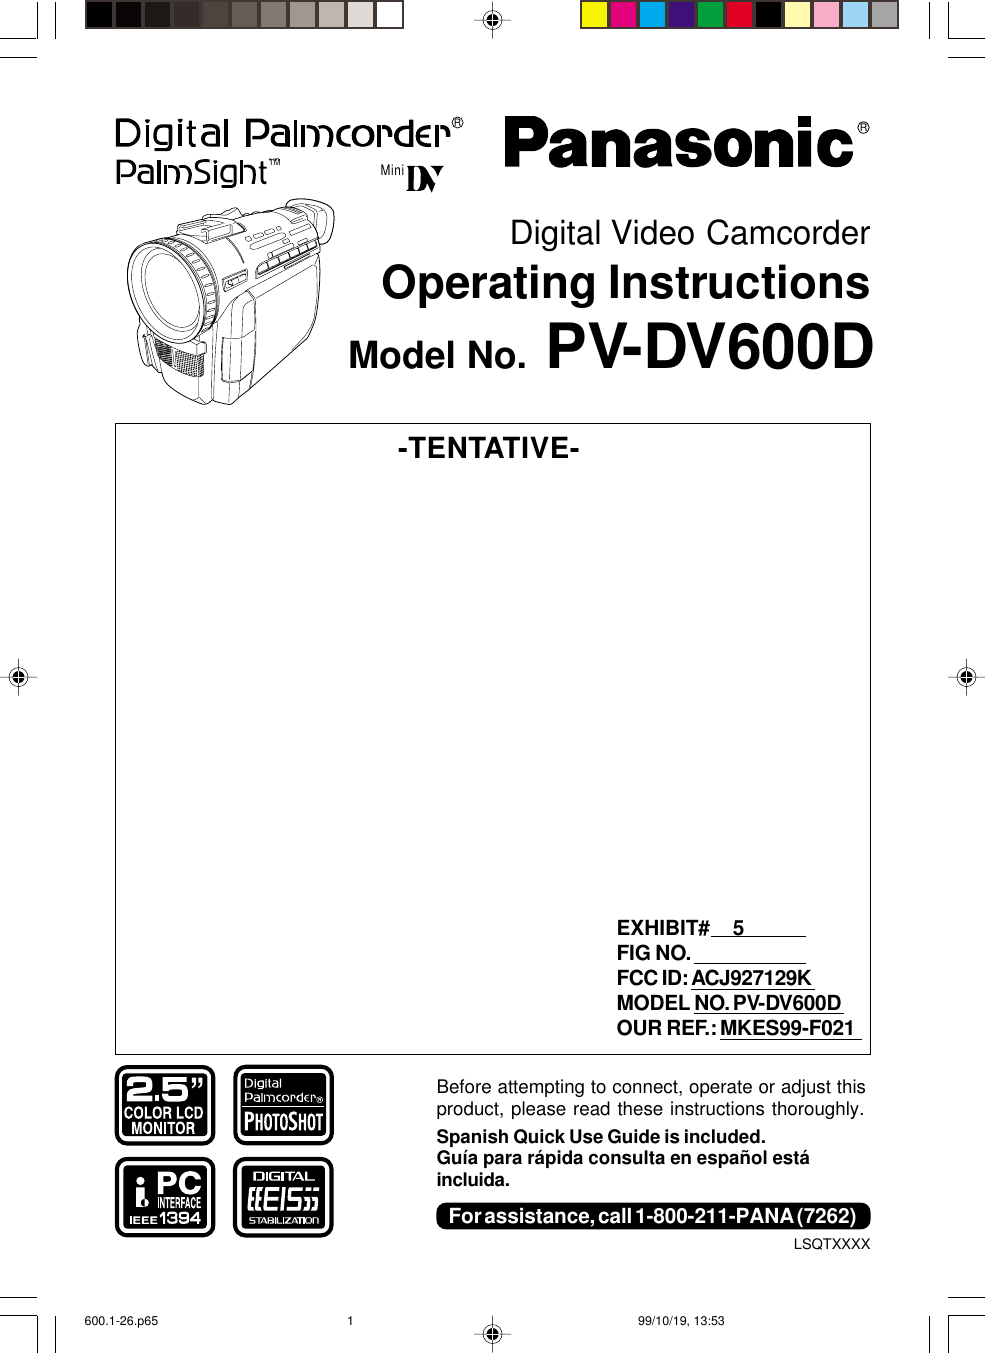 Before attempting to connect, operate or adjust thisproduct, please read these instructions thoroughly.Spanish Quick Use Guide is included.Guía para rápida consulta en español estáincluida.R   LSQTXXXXModel No. PV-DV600DDigital Video CamcorderOperating InstructionsRTMTMMiniFor assistance, call 1-800-211-PANA (7262)-TENTATIVE-EXHIBIT#    5FIG NO.FCC ID: ACJ927129KMODEL NO. PV-DV600DOUR REF.: MKES99-F021600.1-26.p65 99/10/19, 13:531